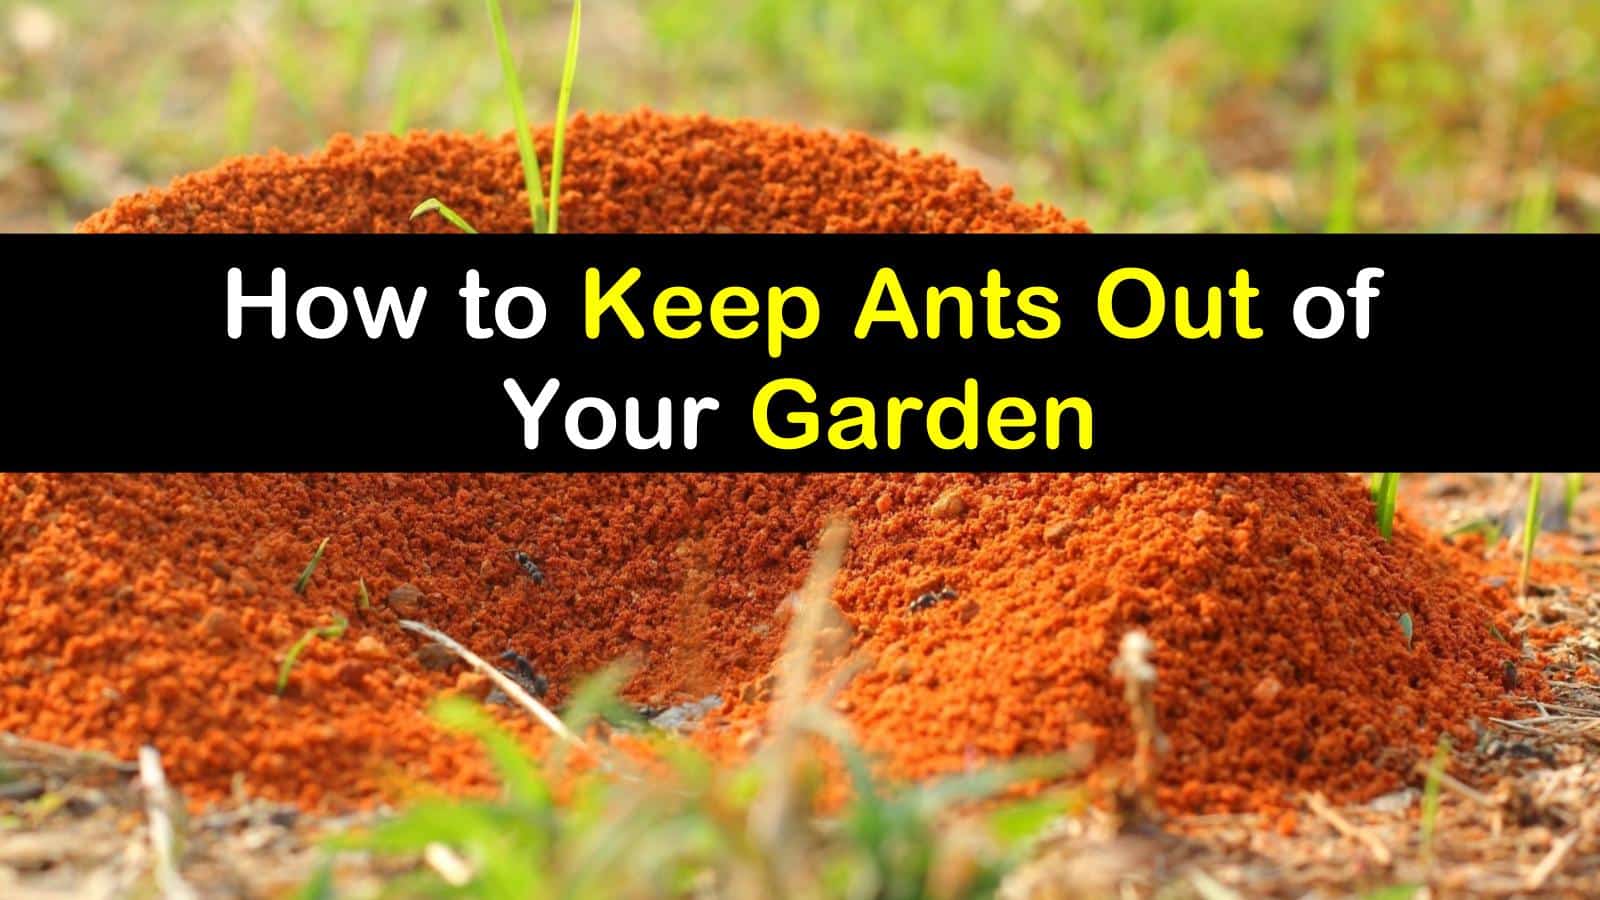 How to Keep Ants Out of Your Garden titleimg1